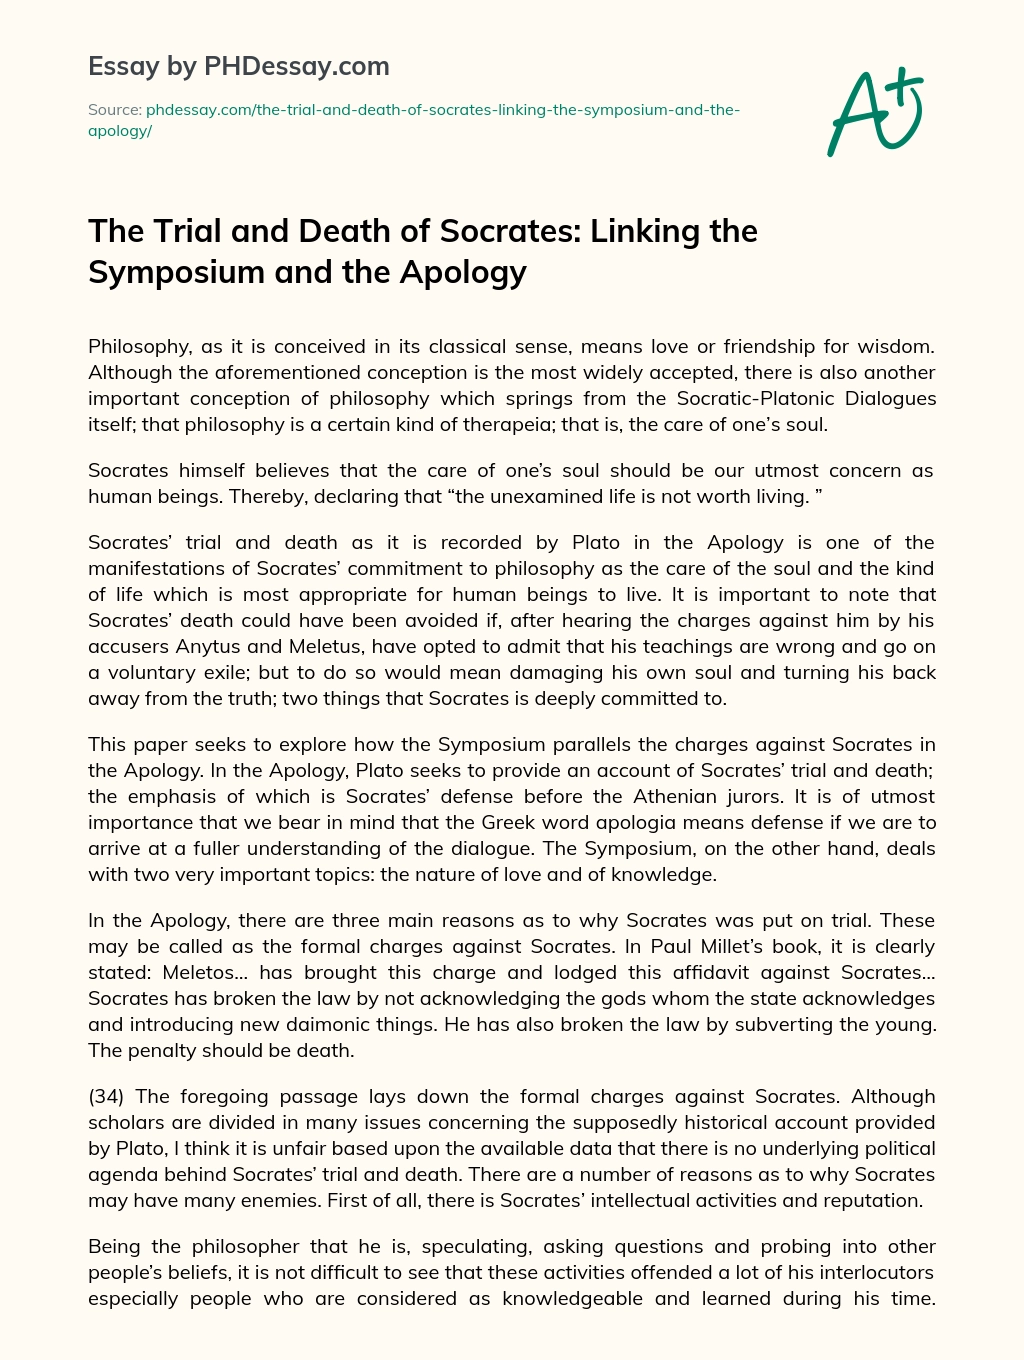 The Trial and Death of Socrates: Linking the Symposium and the Apology essay